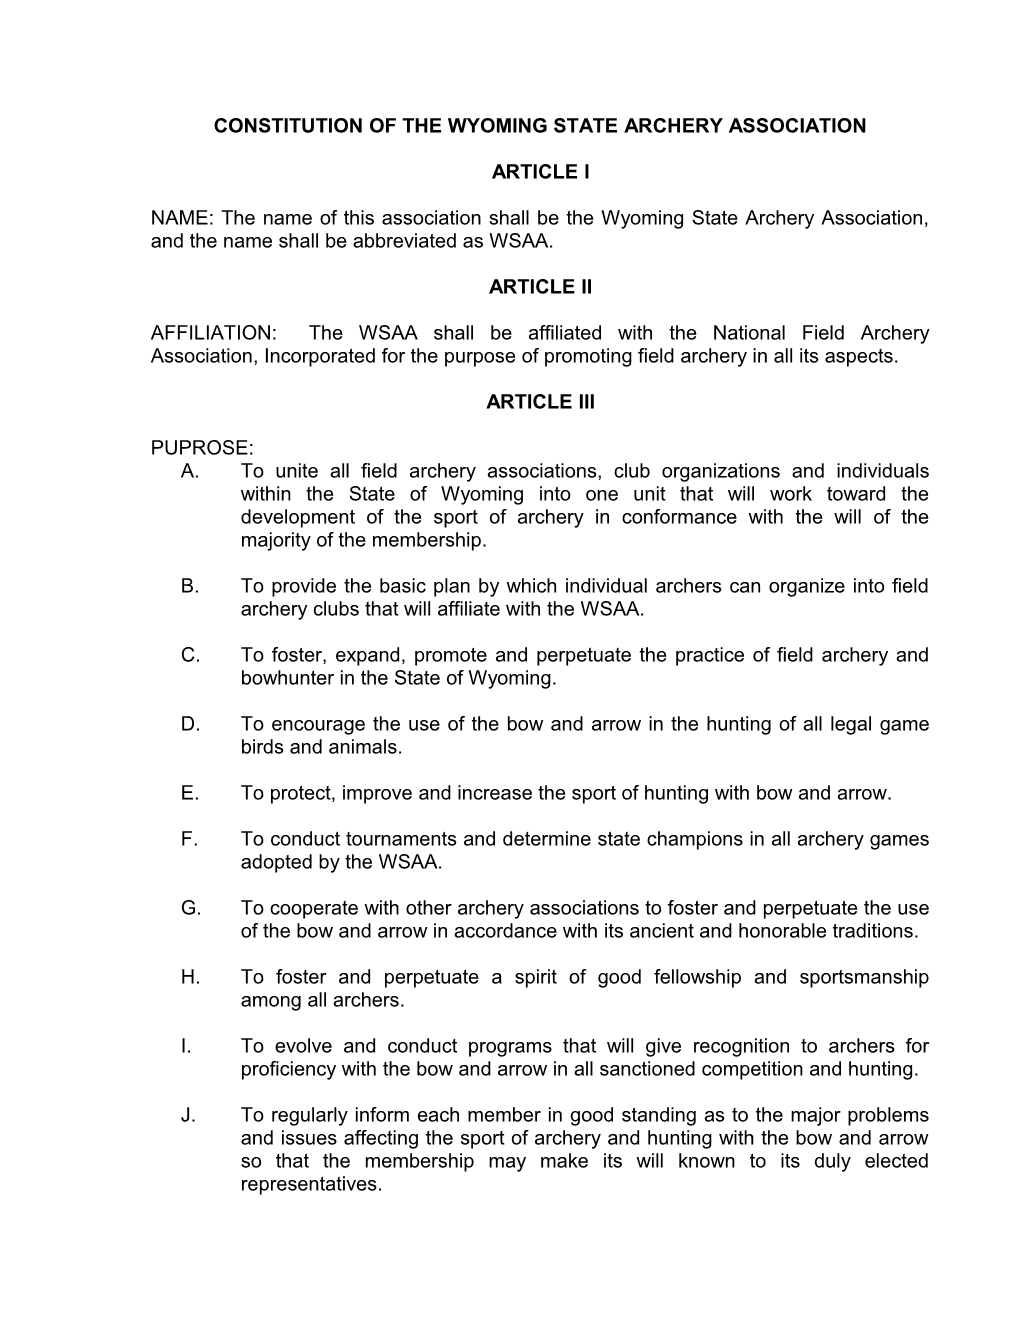 Constitution of the Wyoming State Archery Association